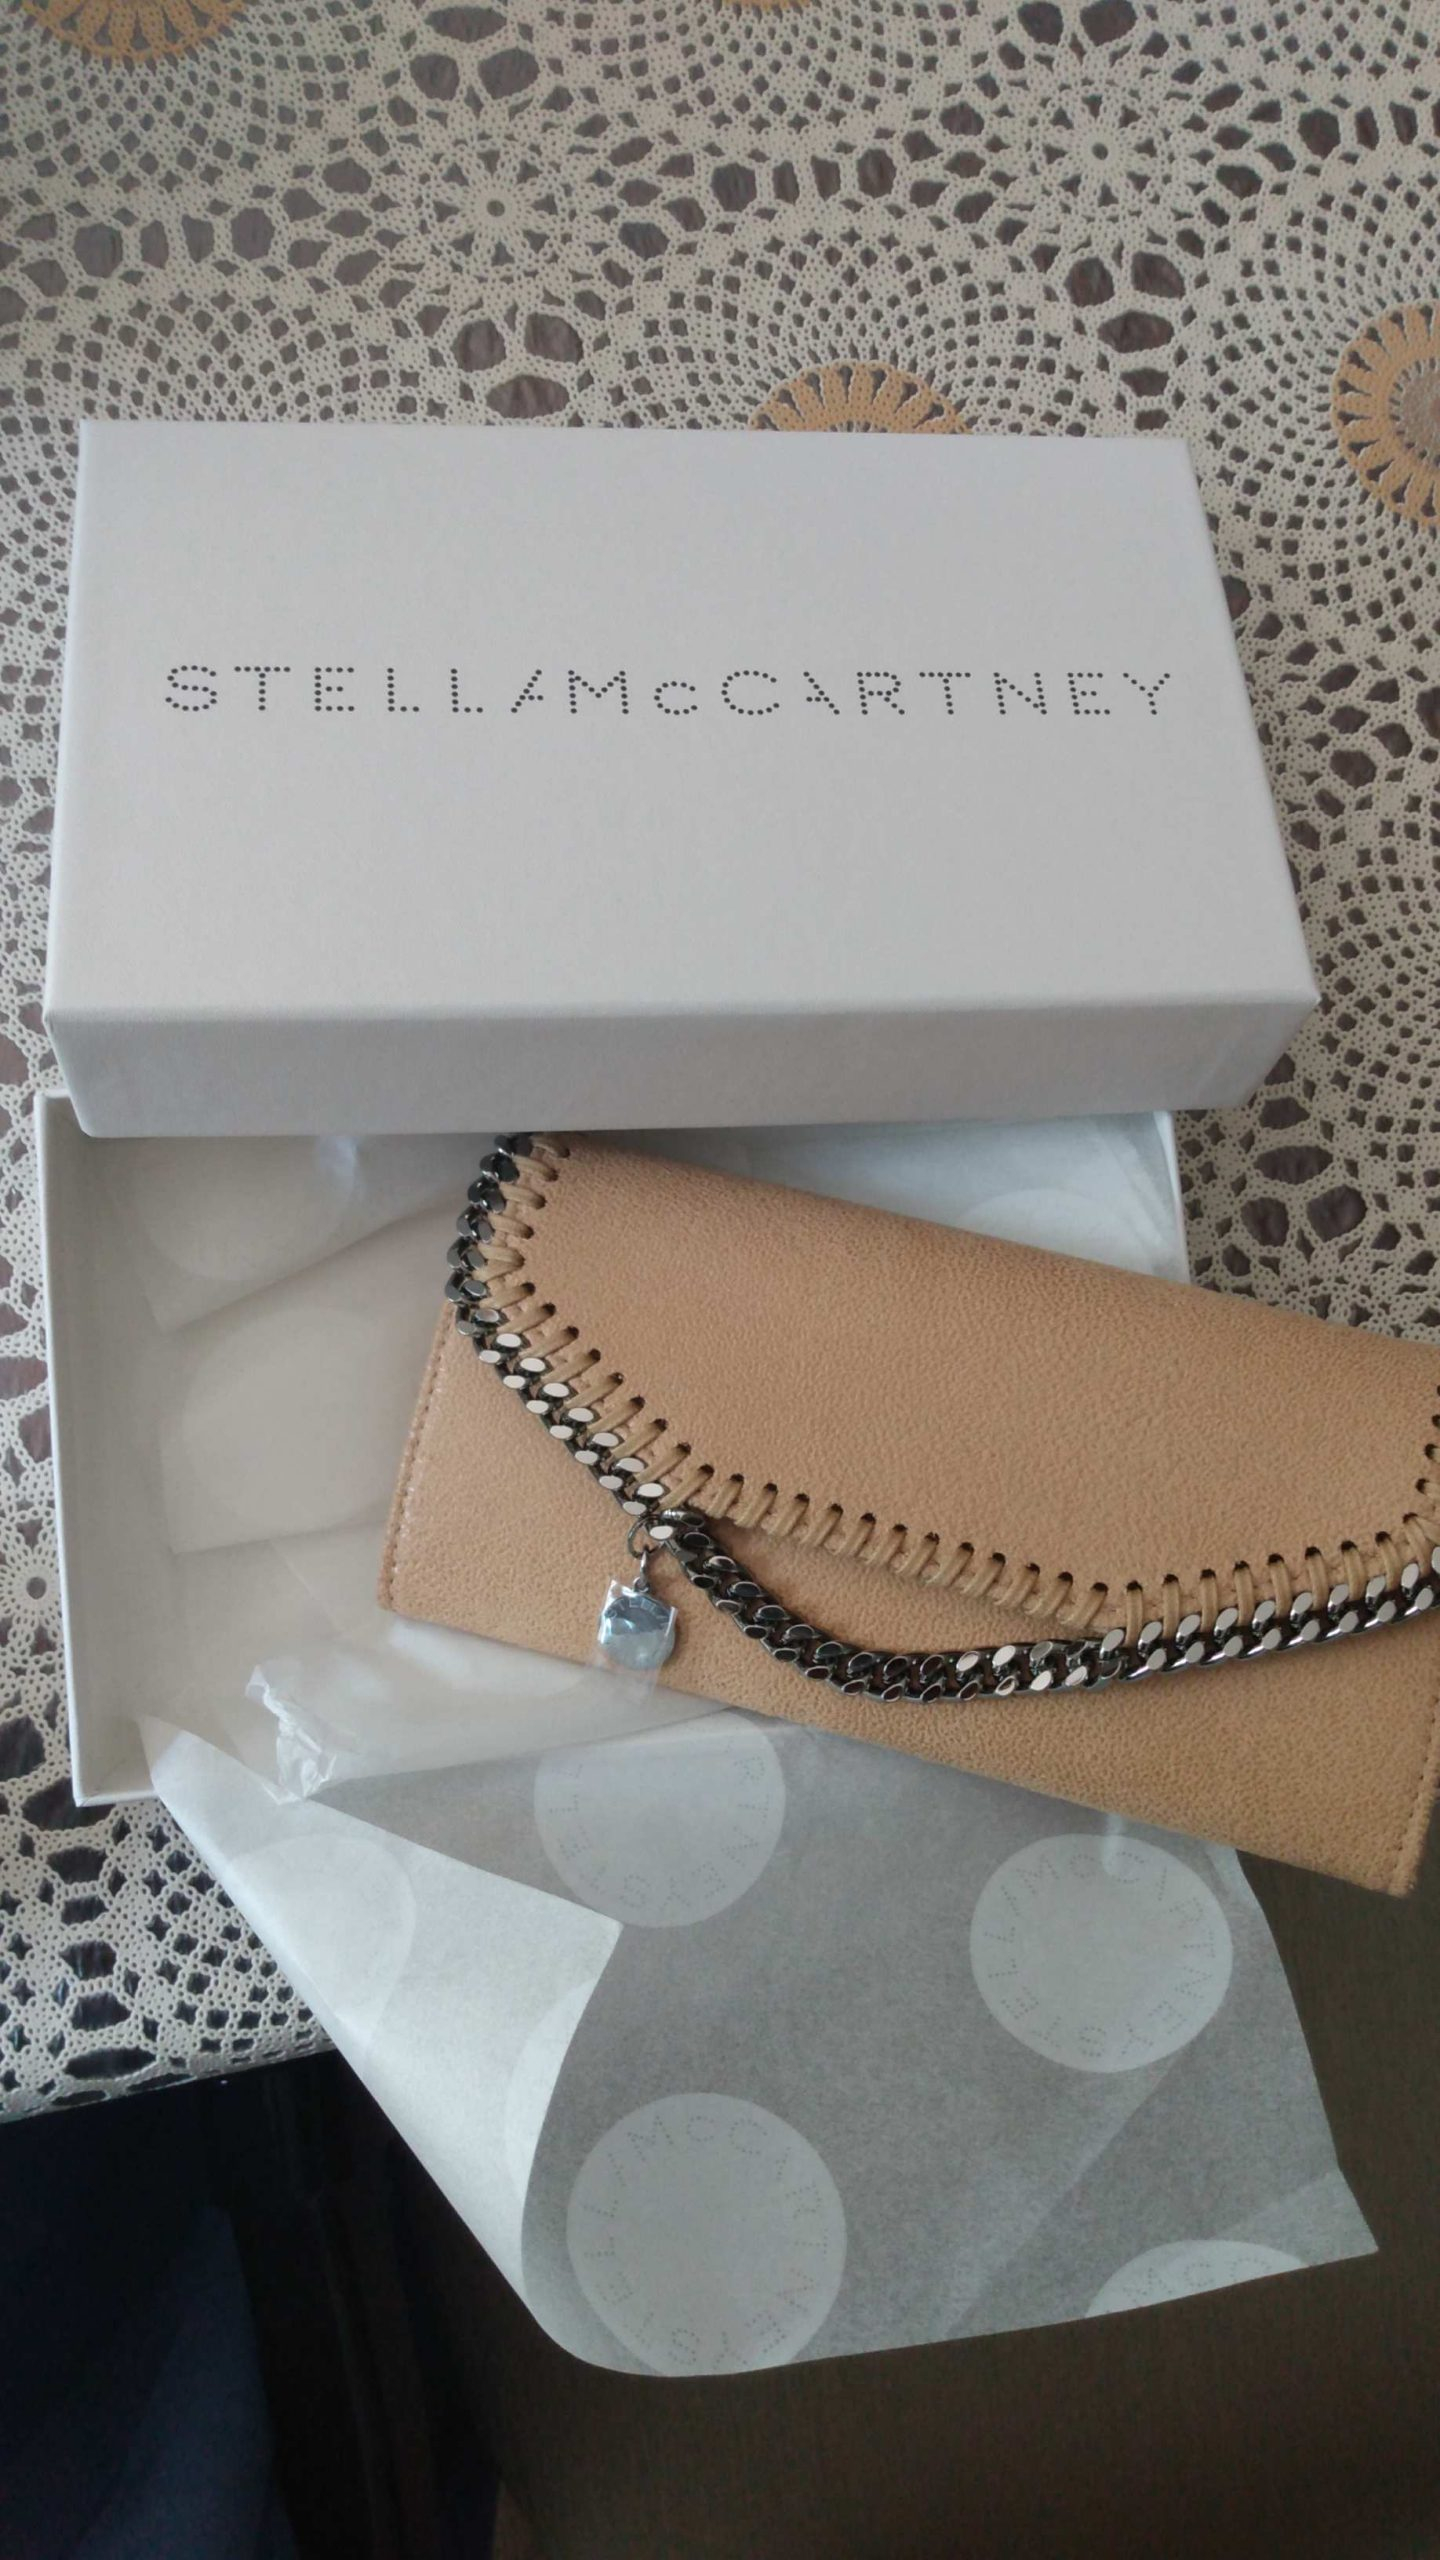 STELLA MCCARTNEY BRAND NEW WITH TAGS FALABELLA WALLET